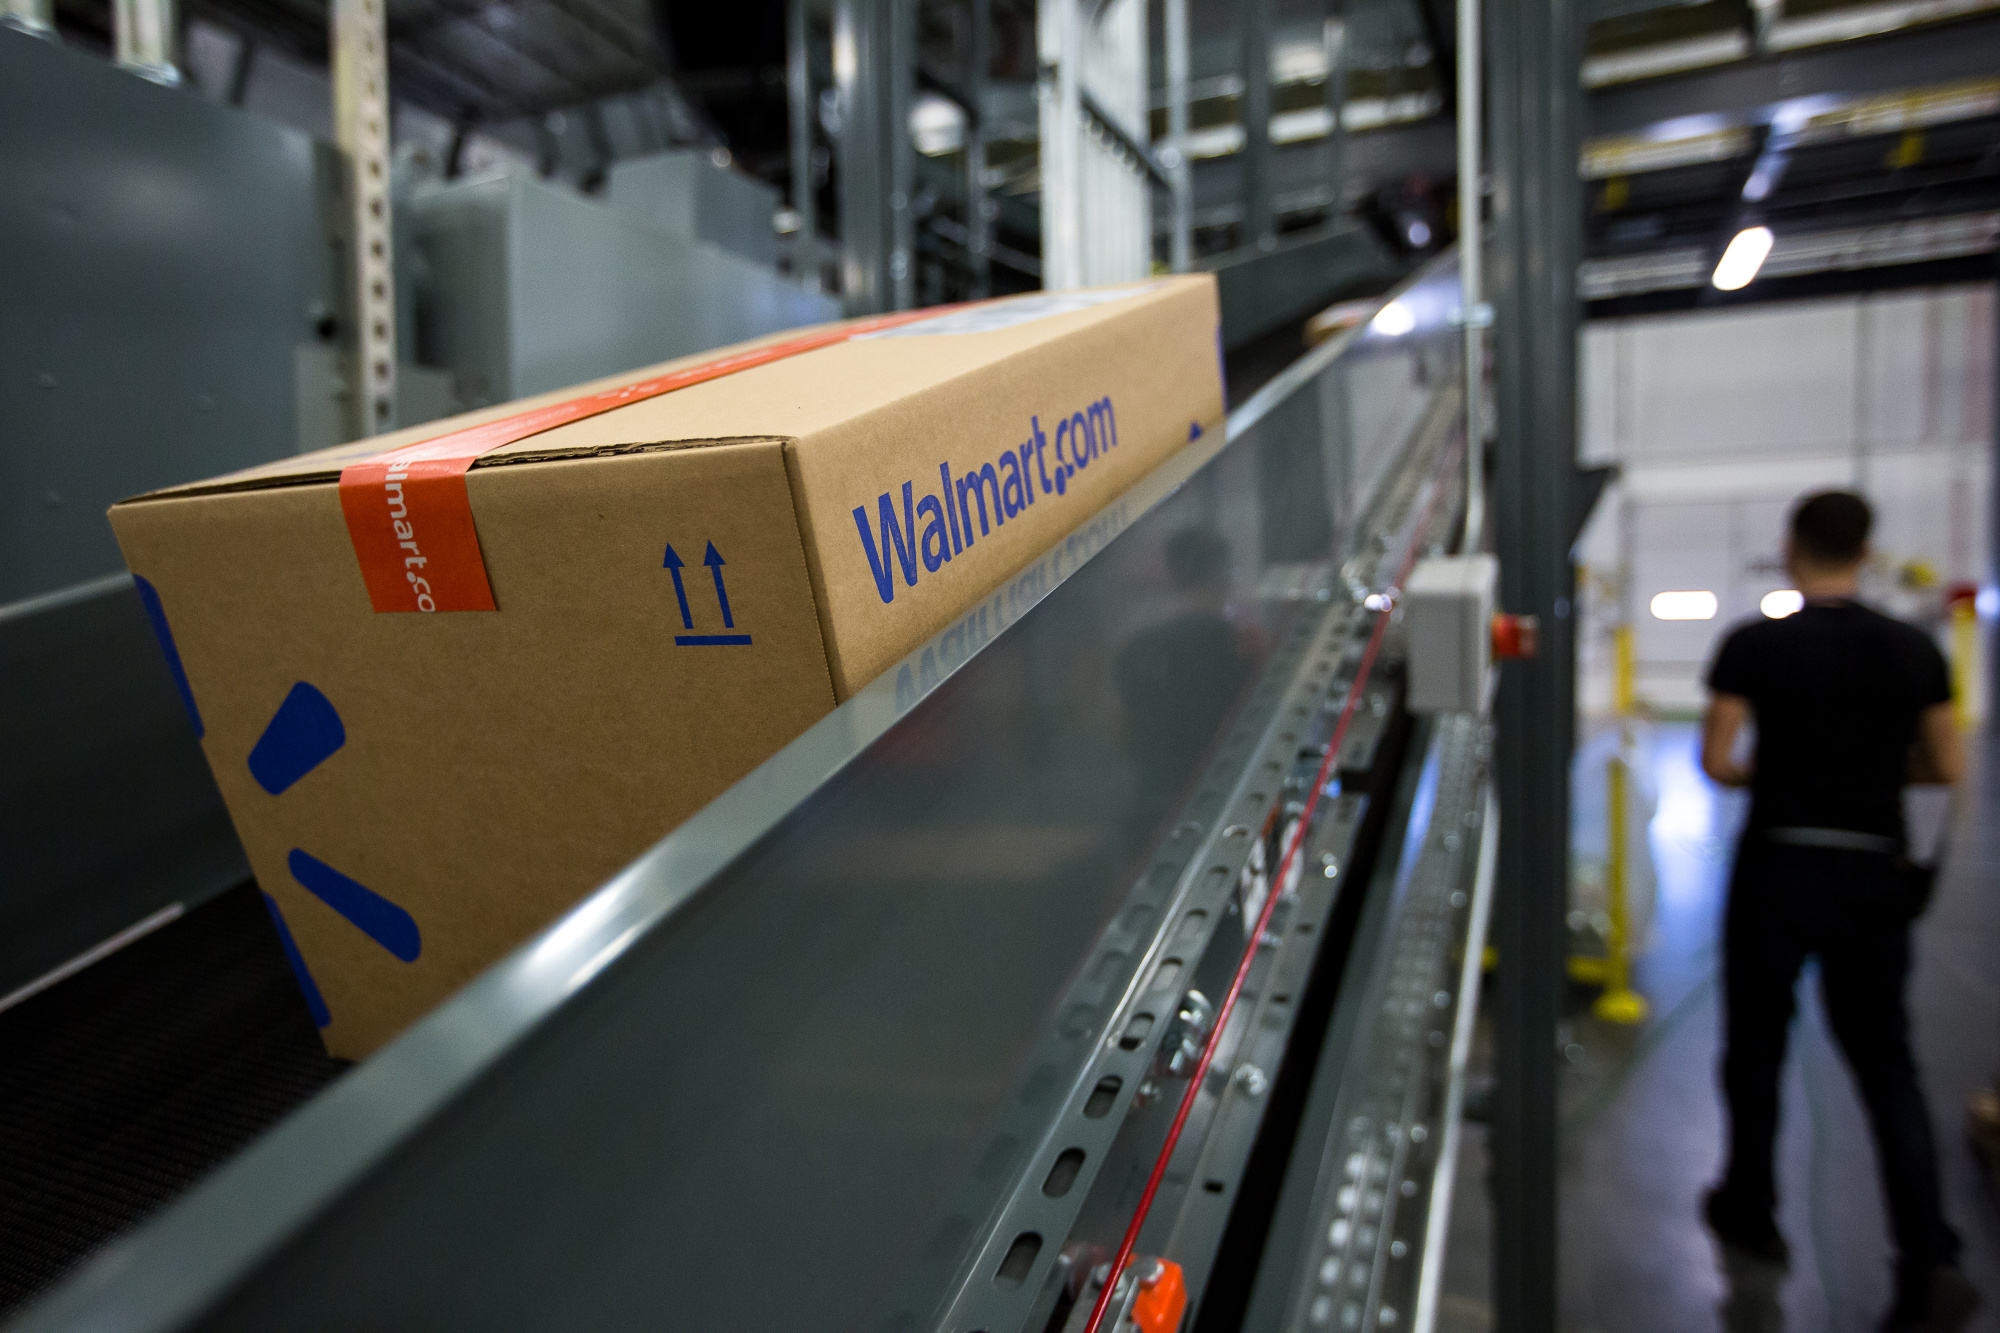 Does Walmart Automation Is A Signal For Upcoming Biggest Layoffs In The US?